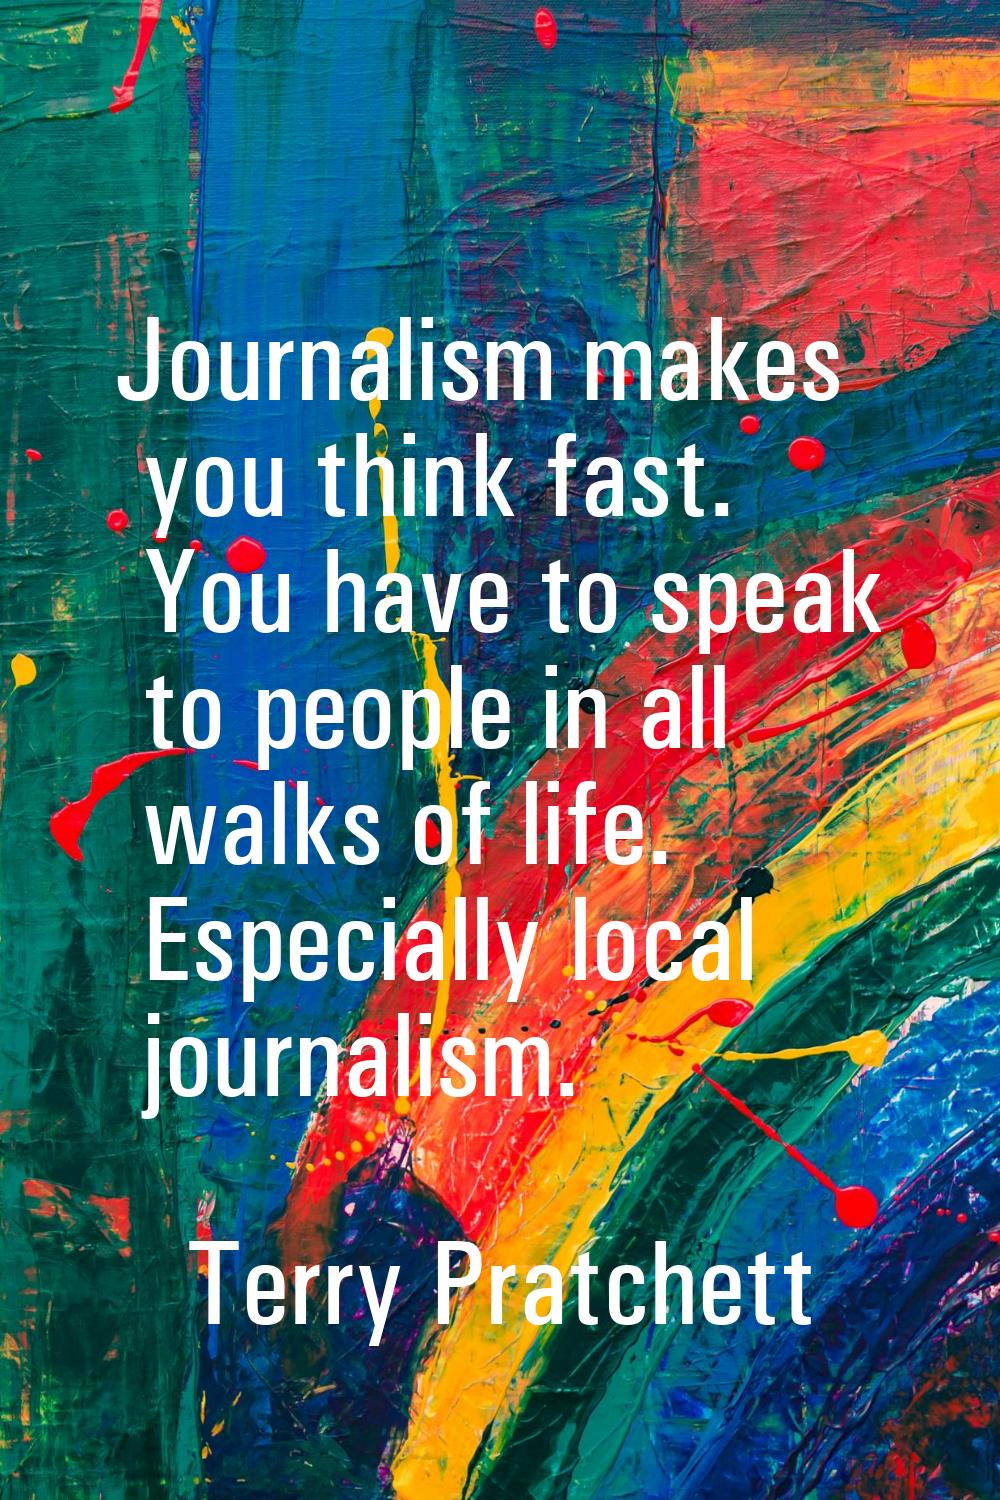 Journalism makes you think fast. You have to speak to people in all walks of life. Especially local